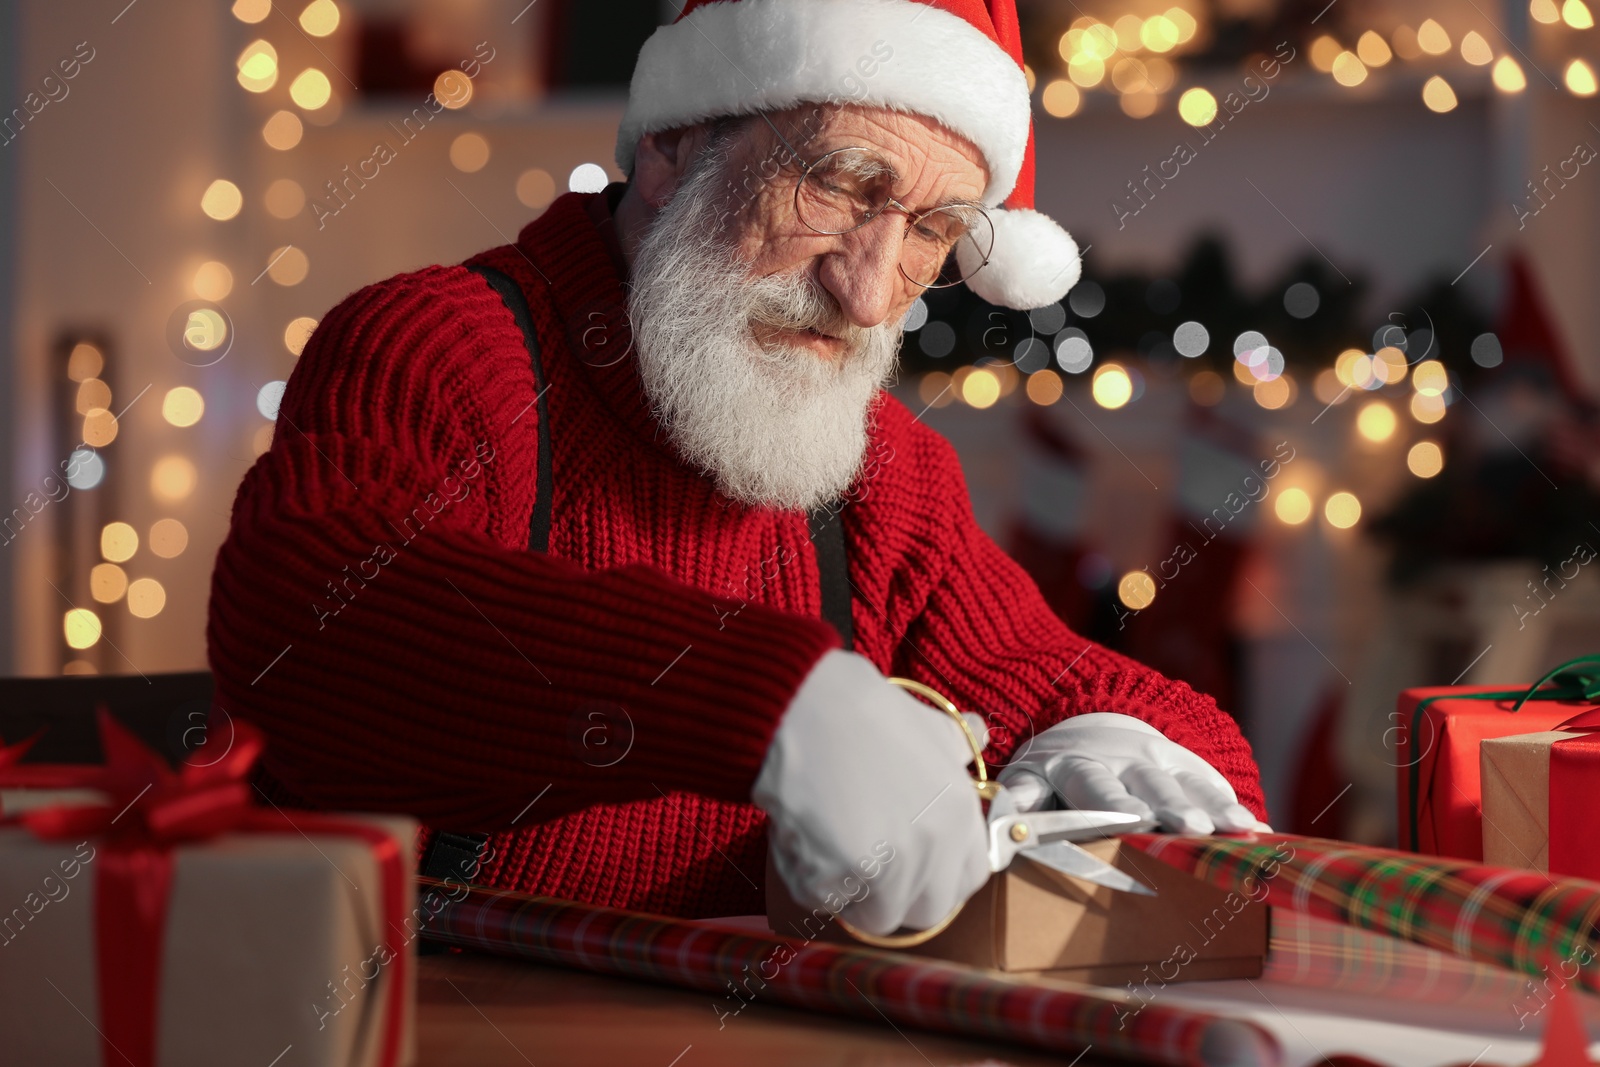 Photo of Santa Claus wrapping gift at his workplace in room decorated for Christmas